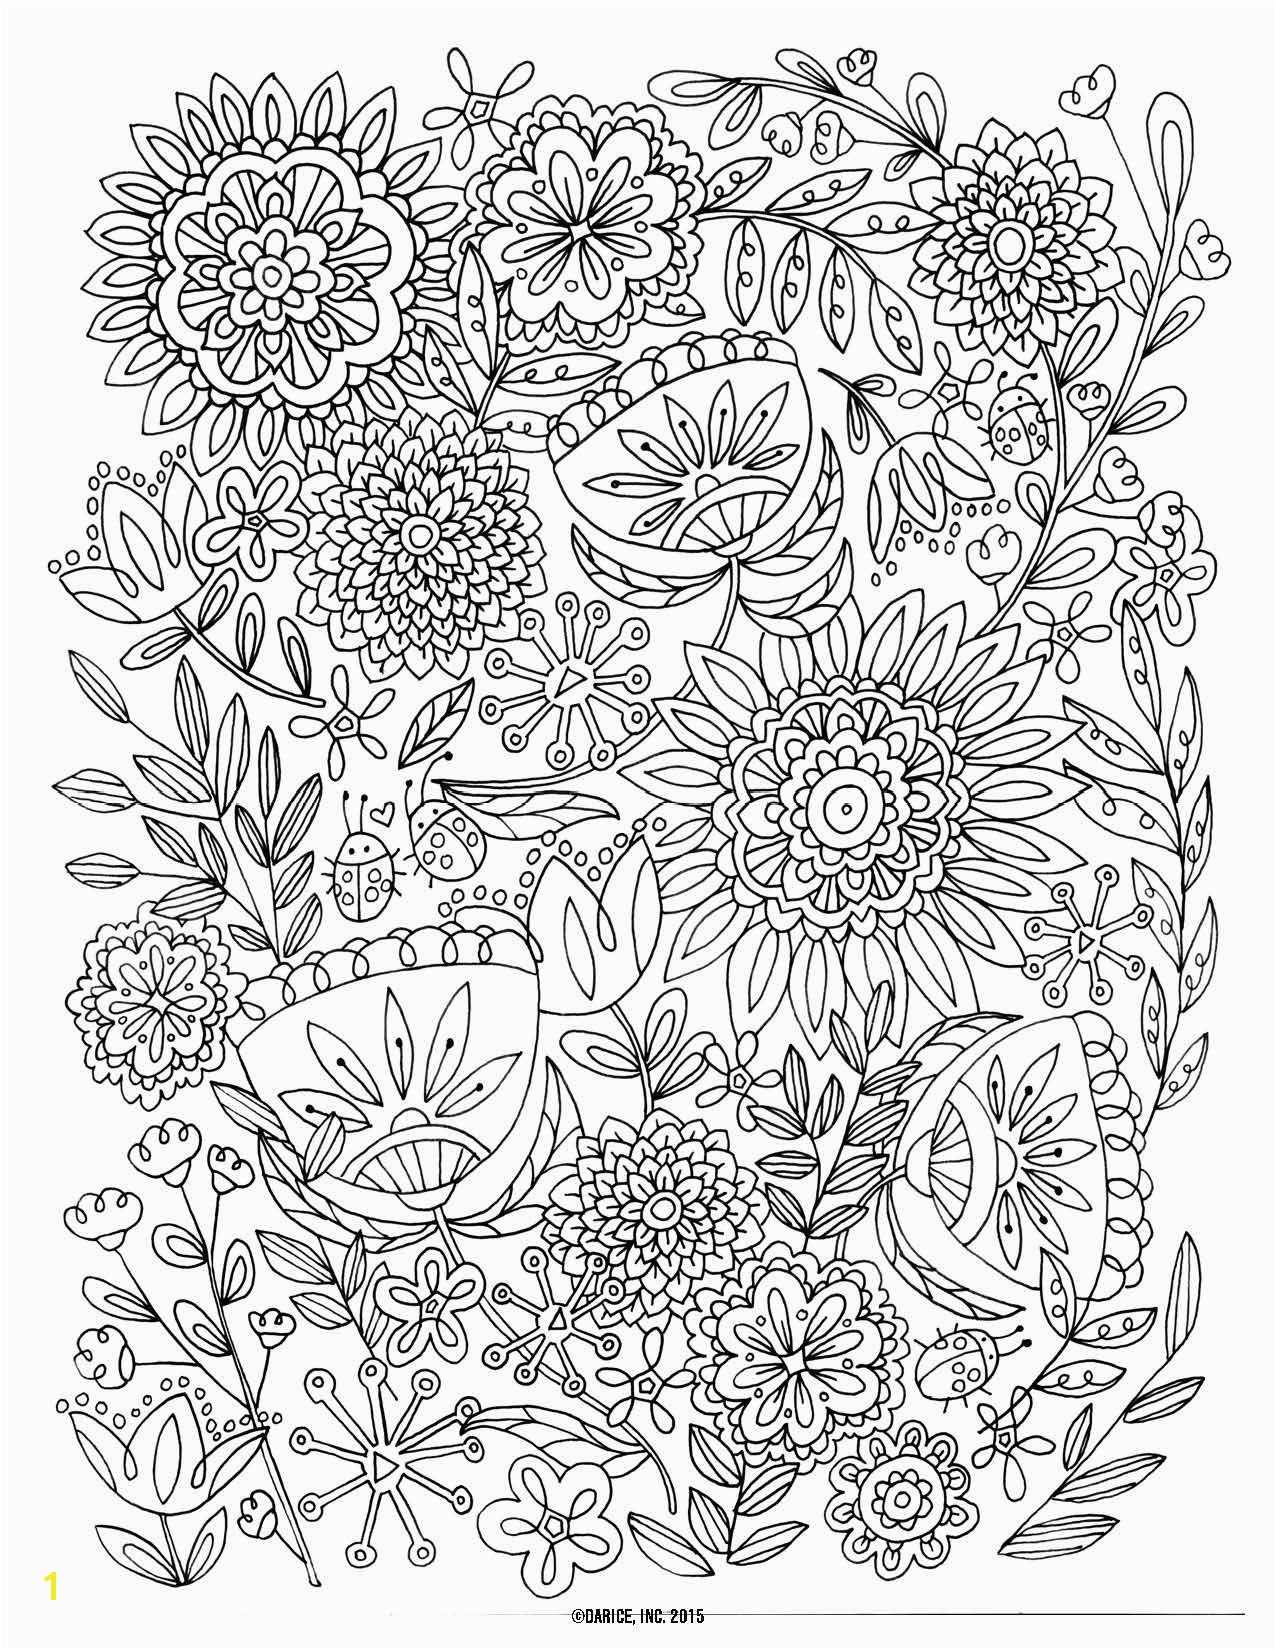 Cool Coloring Page for Adult Od Kids Simple Floral Heart with Ribbon